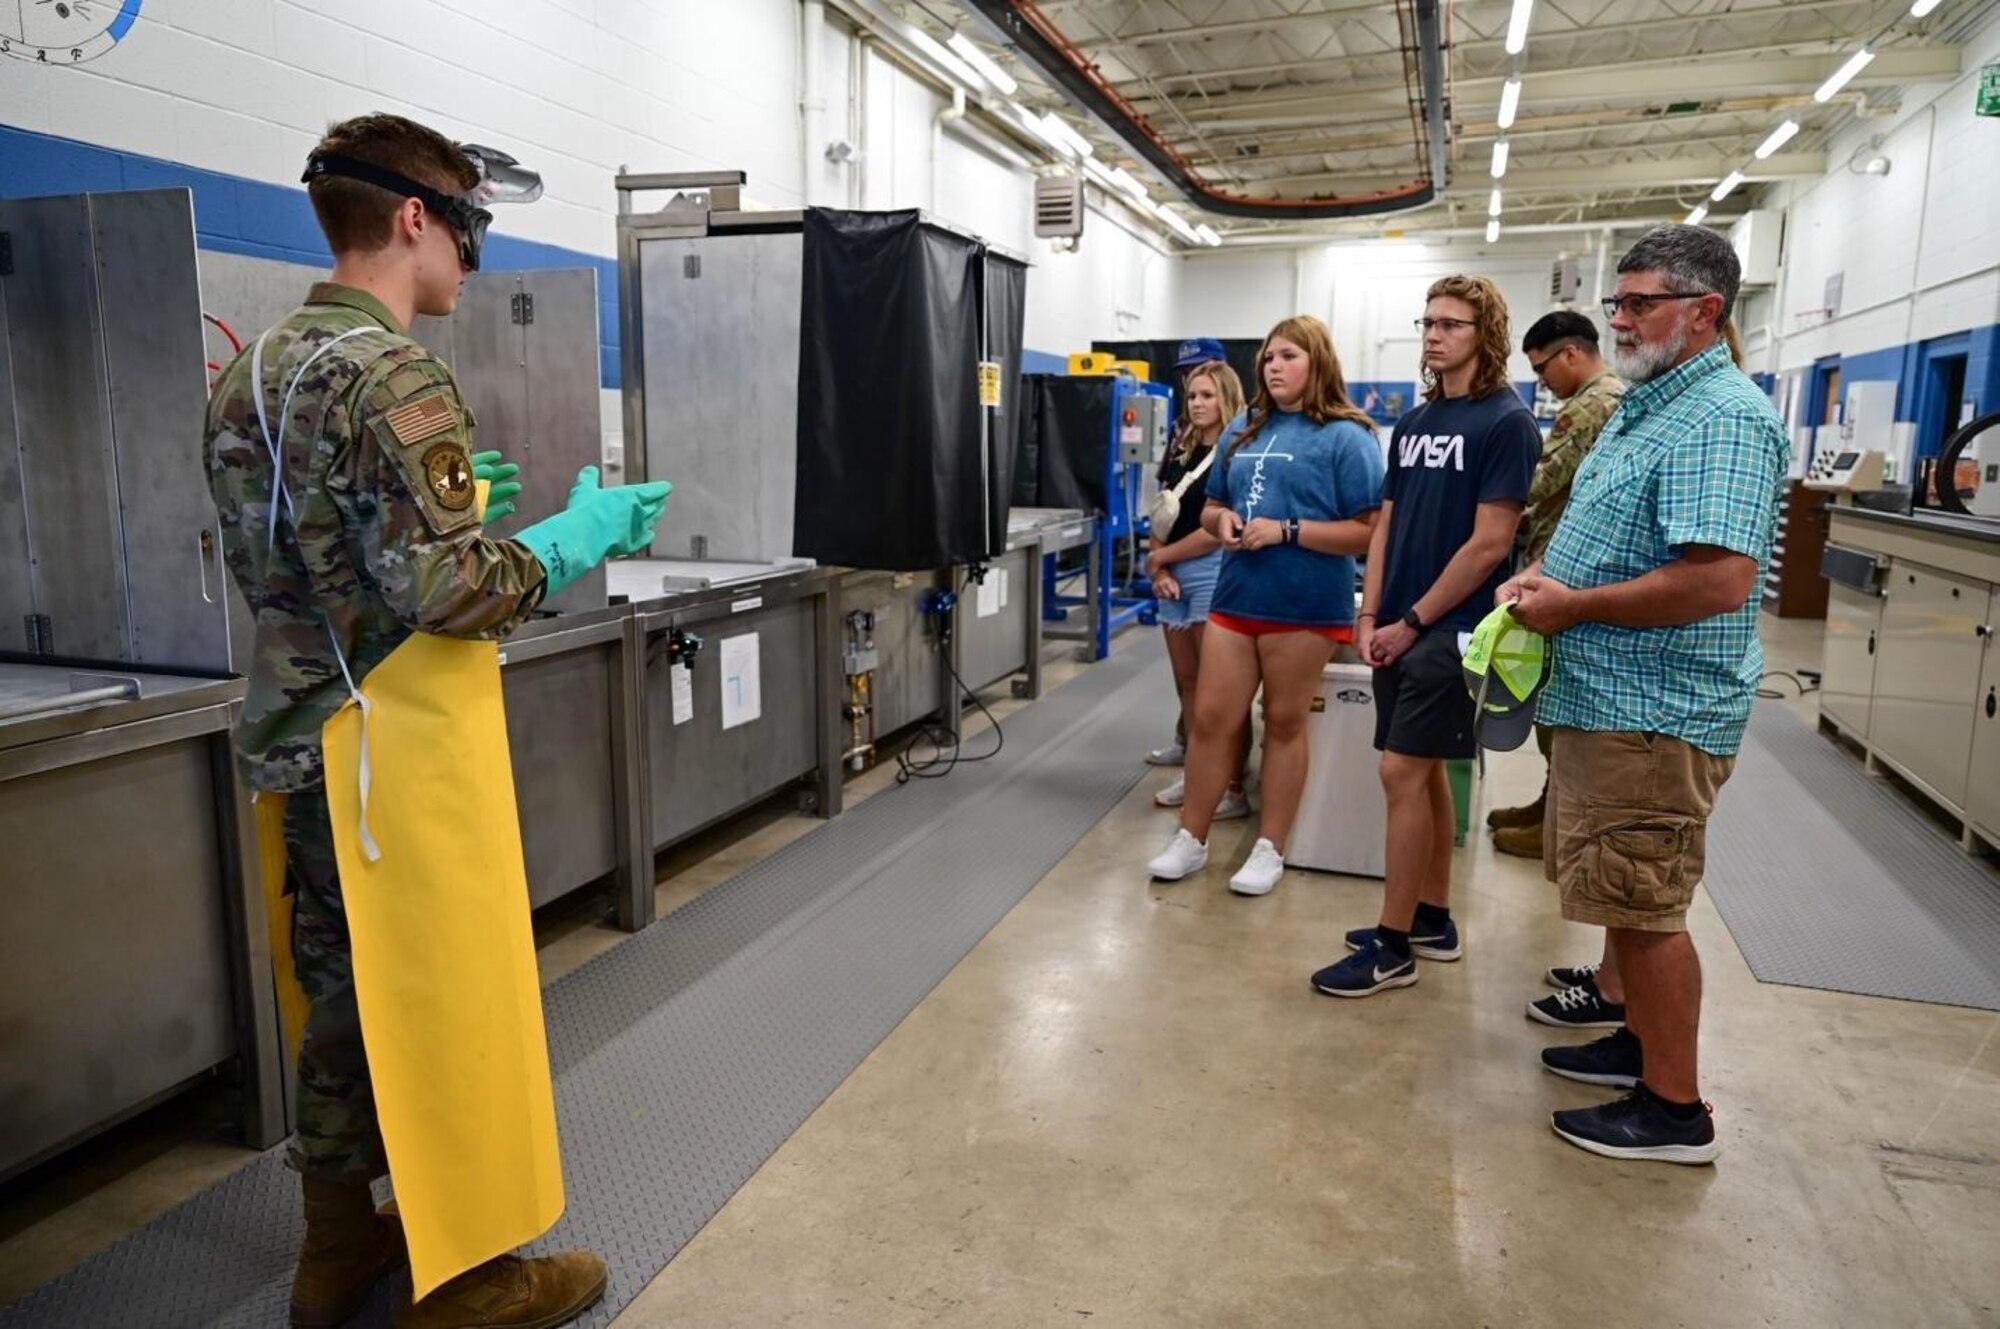 Airman 1st Class Brett Miska, a 28th Maintenance Squadron Fabrication Flight non-destructive inspection apprentice, provides a demonstration of the Fluorescent Penetrant Line within the NDI lab at Ellsworth Air Force Base, S.D., July 13, 2022.